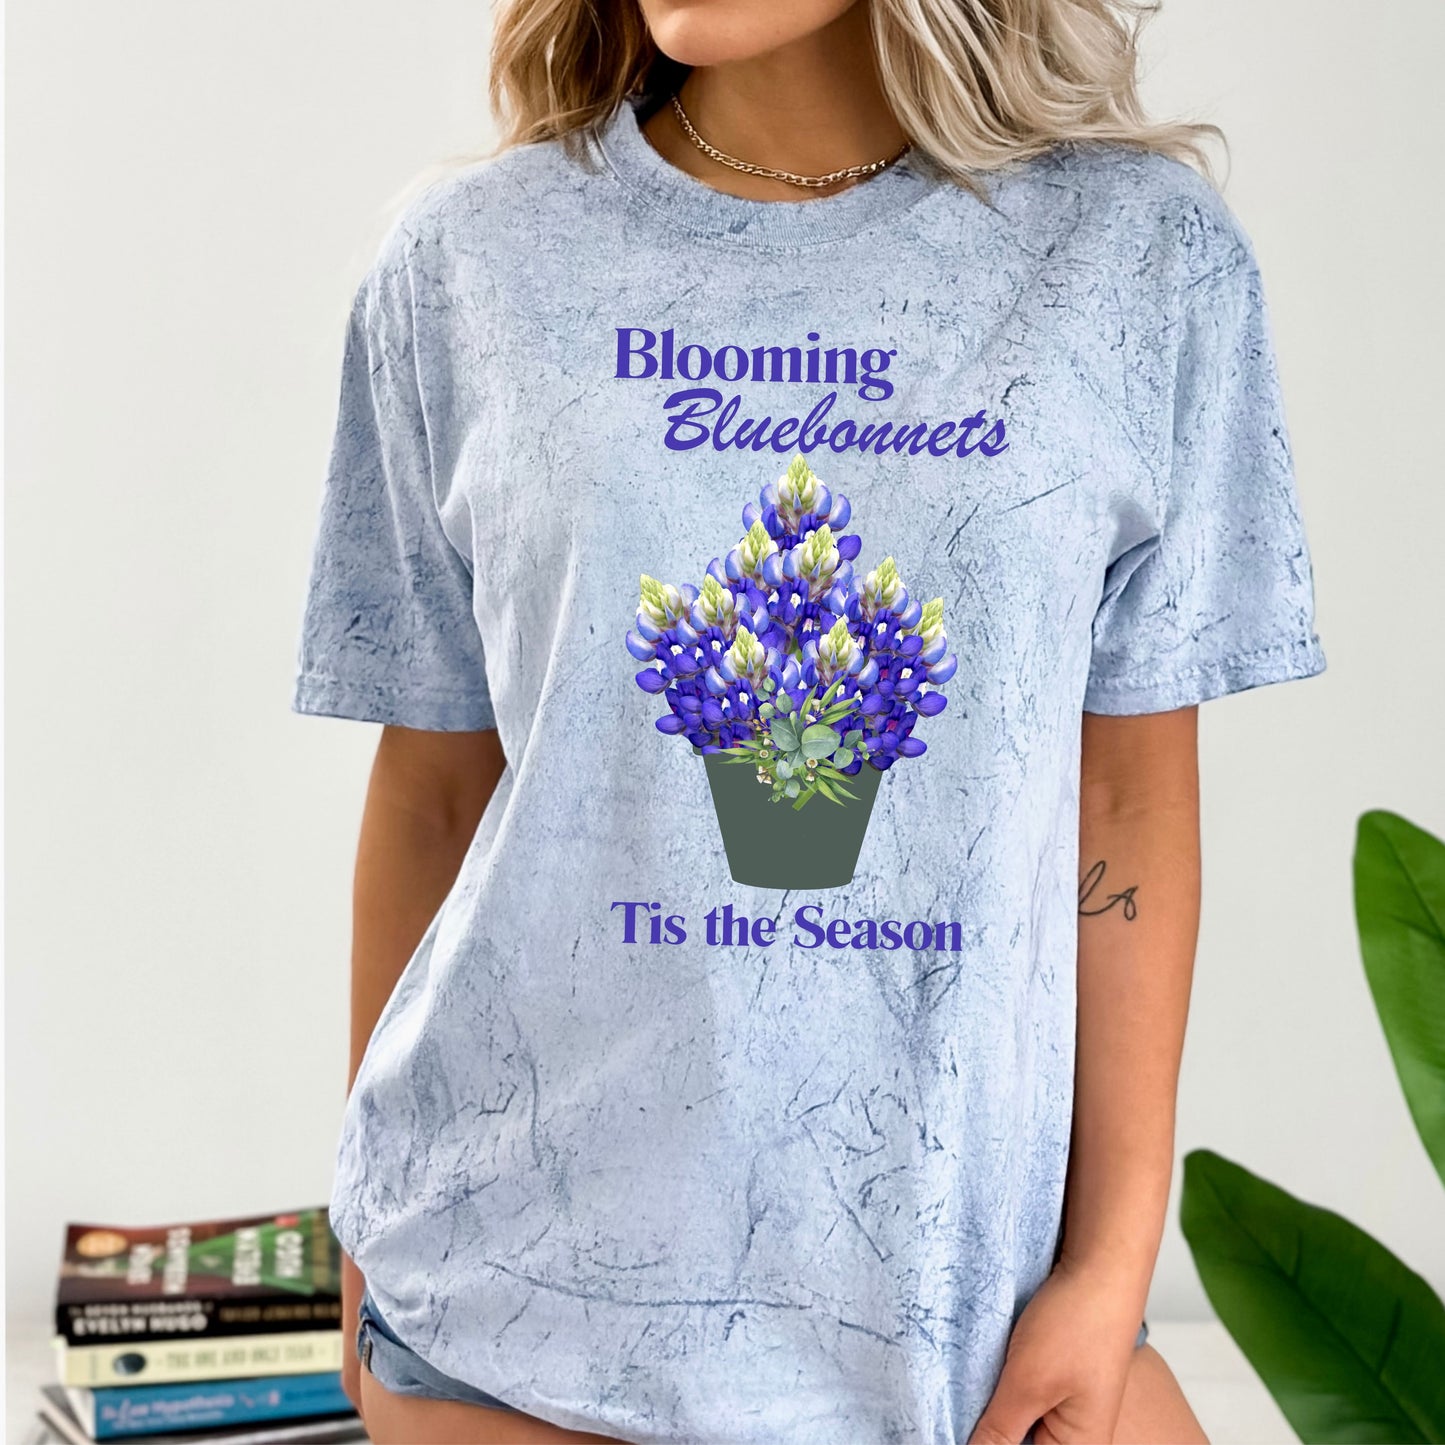 Blooming Bluebonnets Color Blast T-Shirt, Texas Bluebonnets, Floral T-Shirt, Gifts For Her, Friend Gift, Mom Gift, Texas TShirt, Texas Shirt